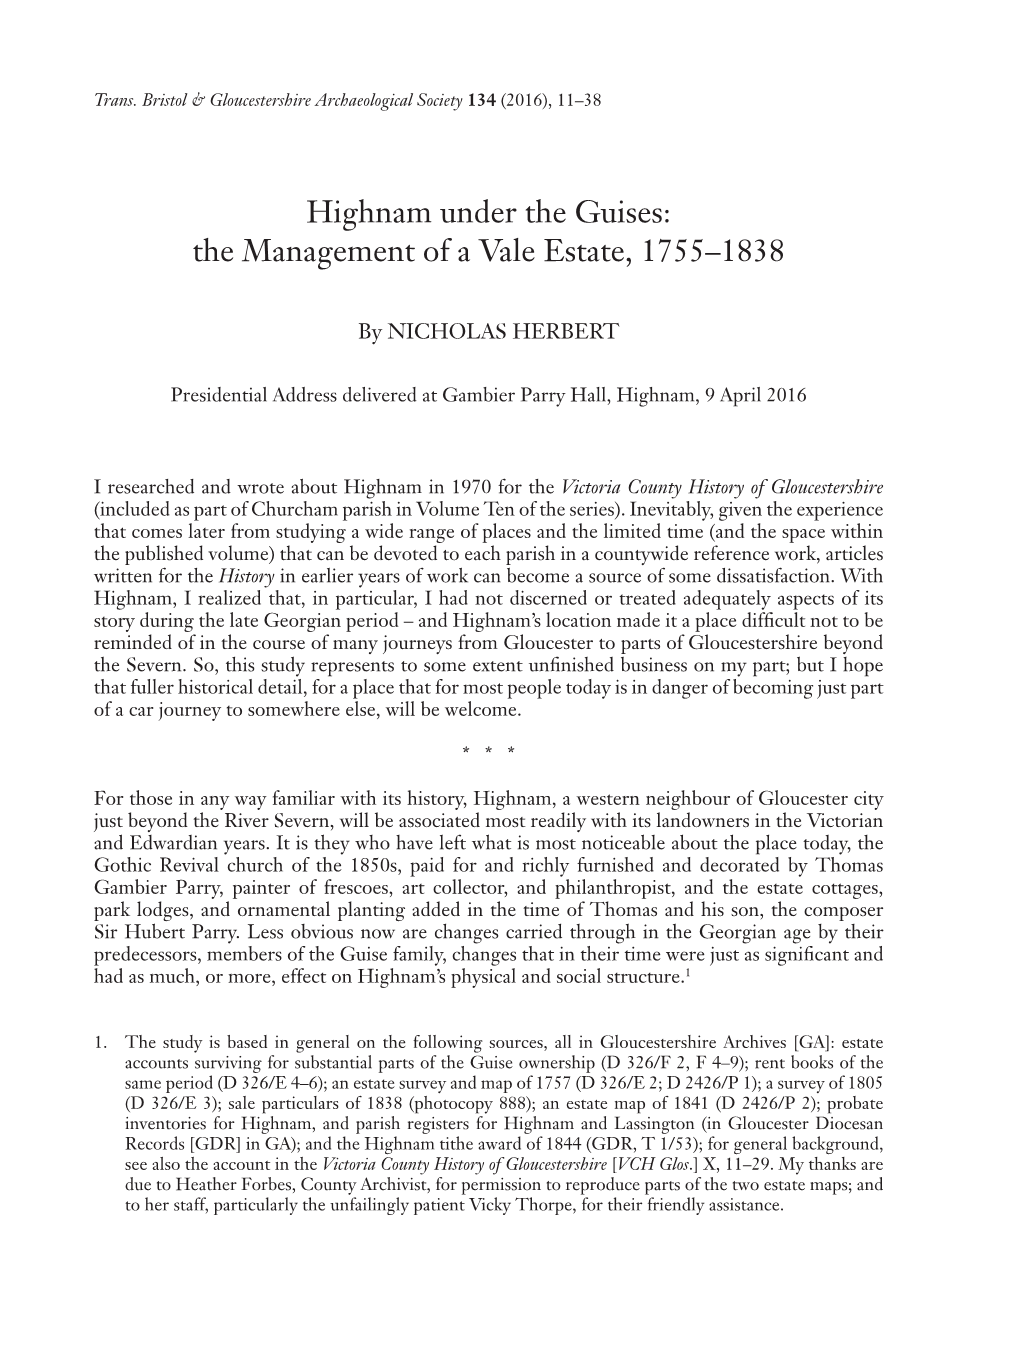 Highnam Under the Guises: the Management of a Vale Estate, 1755–1838